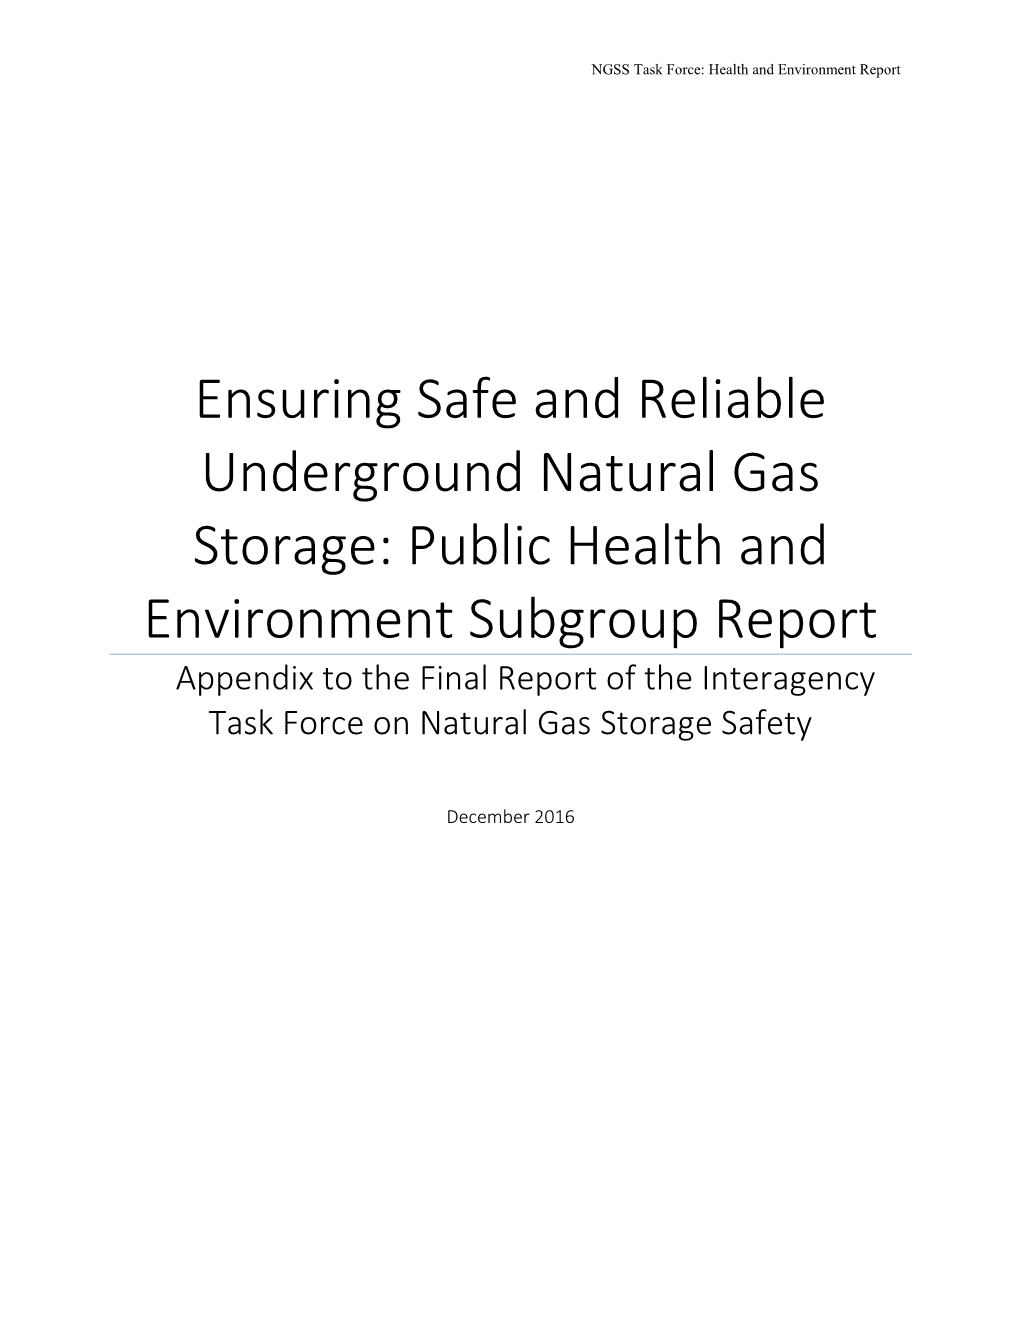 Ensuring Safe and Reliable Underground Natural Gas Storage